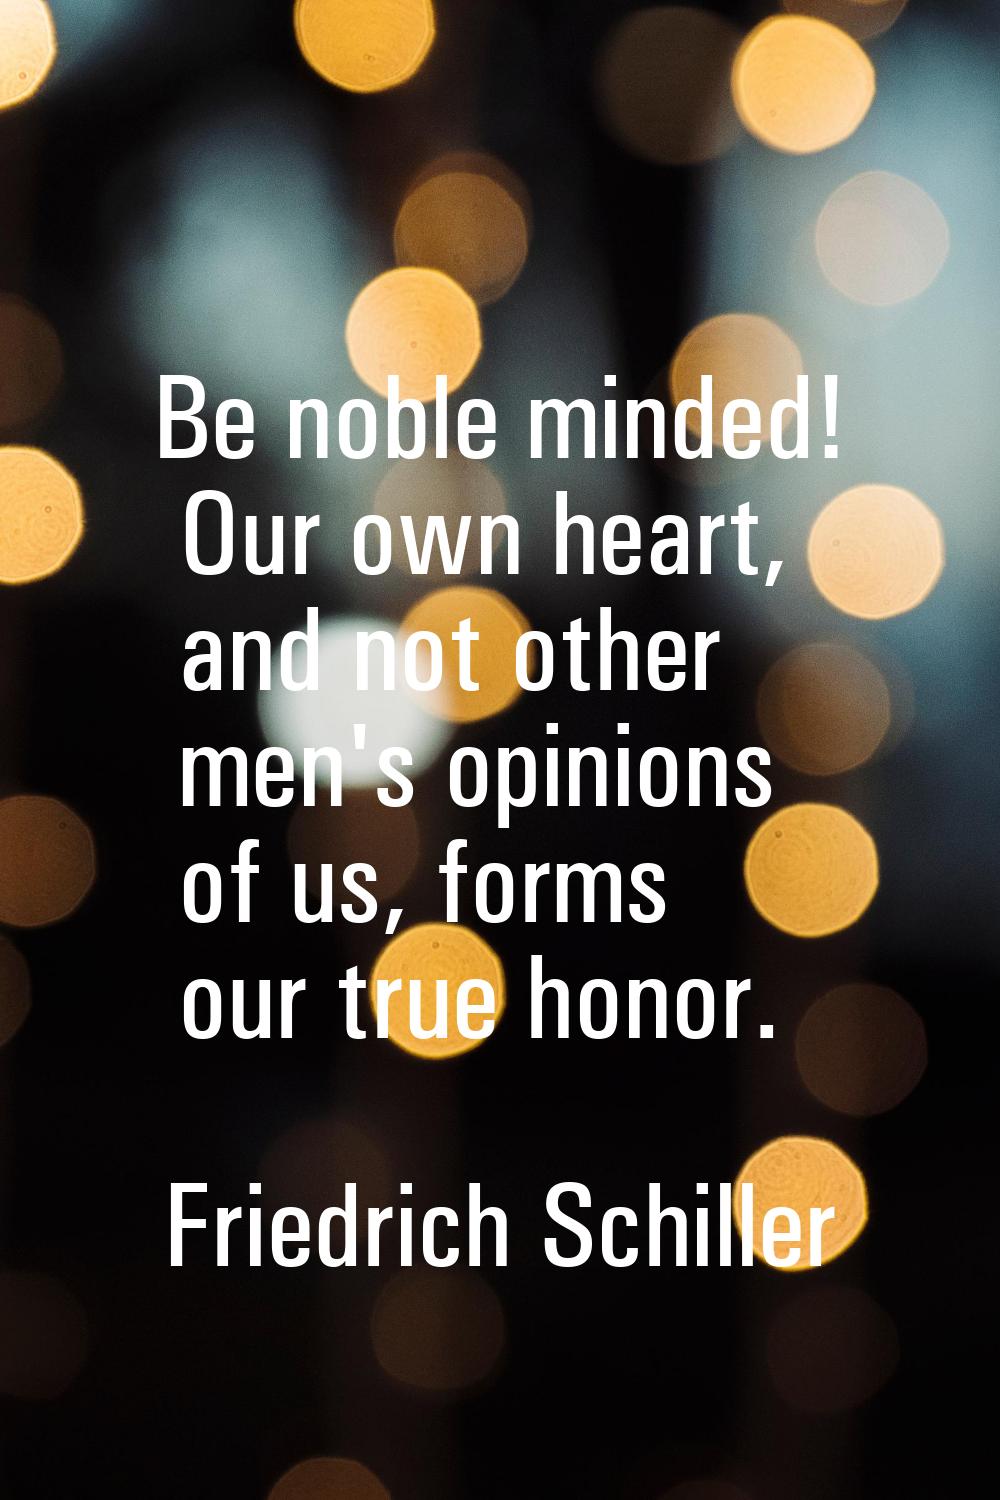 Be noble minded! Our own heart, and not other men's opinions of us, forms our true honor.